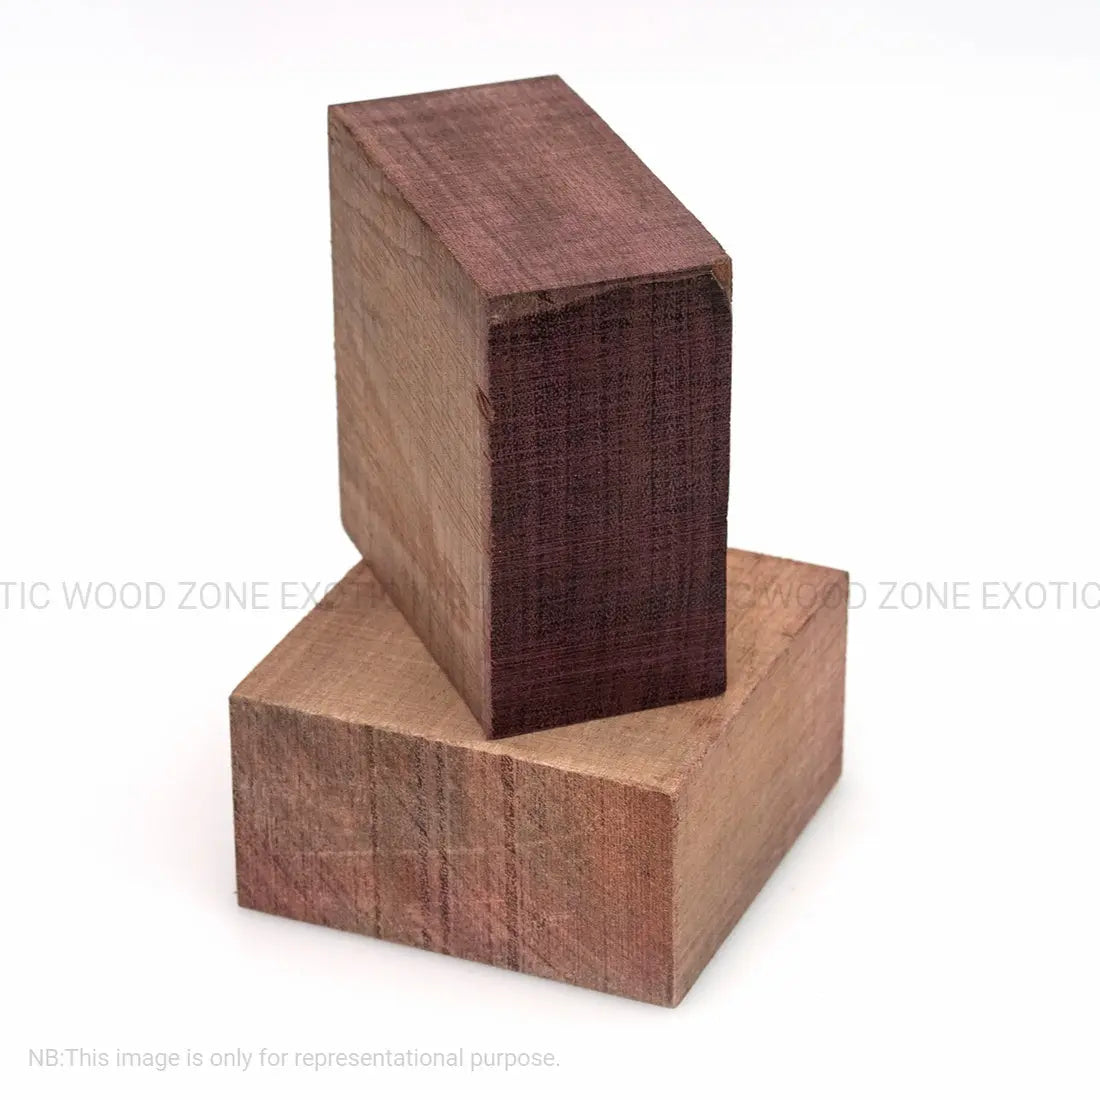 Pack Of 1, Purpleheart Wood Bowl Blanks 6” x 6” x 3” - Exotic Wood Zone - Buy online Across USA 